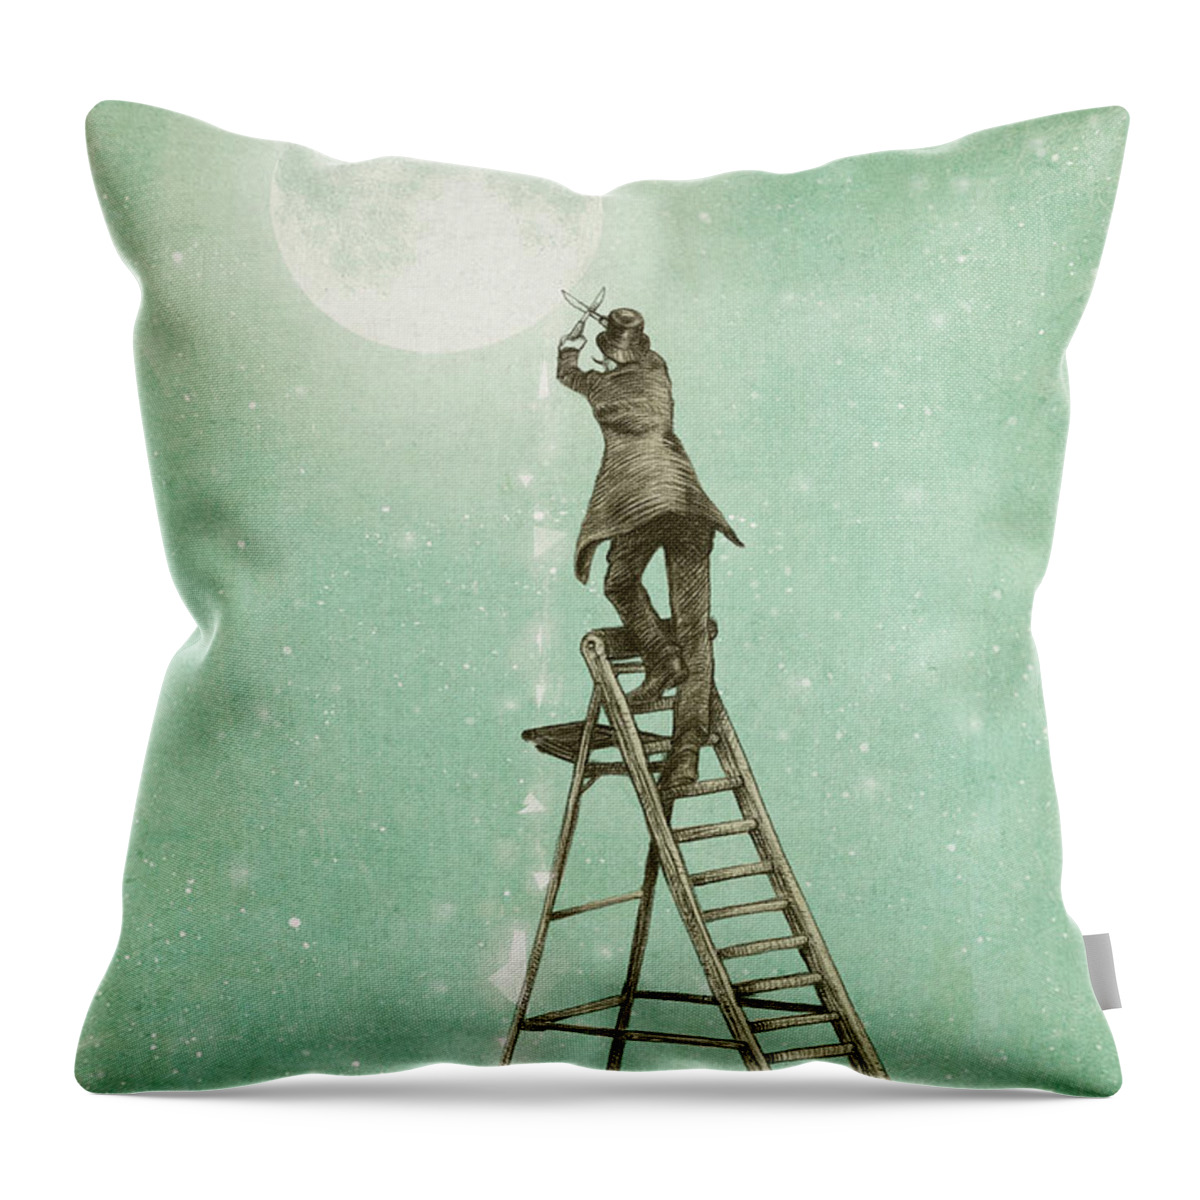 Moon Throw Pillow featuring the digital art Waning Moon by Eric Fan